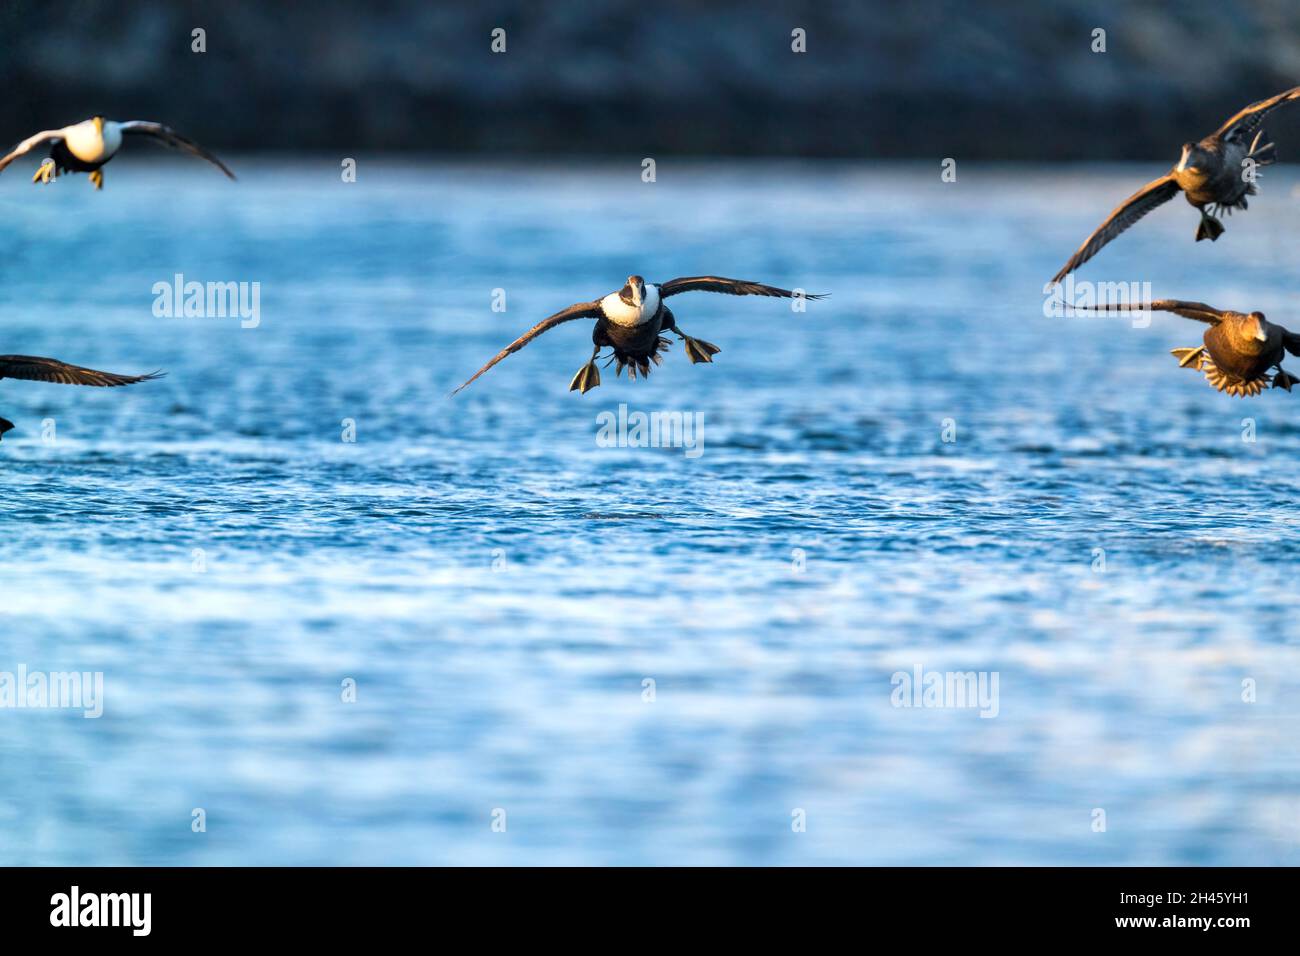 Juvenile male Common Eider coming for a landing on the water with its wings and feet widespread - New England waterfowl photography East Coast USA Stock Photo